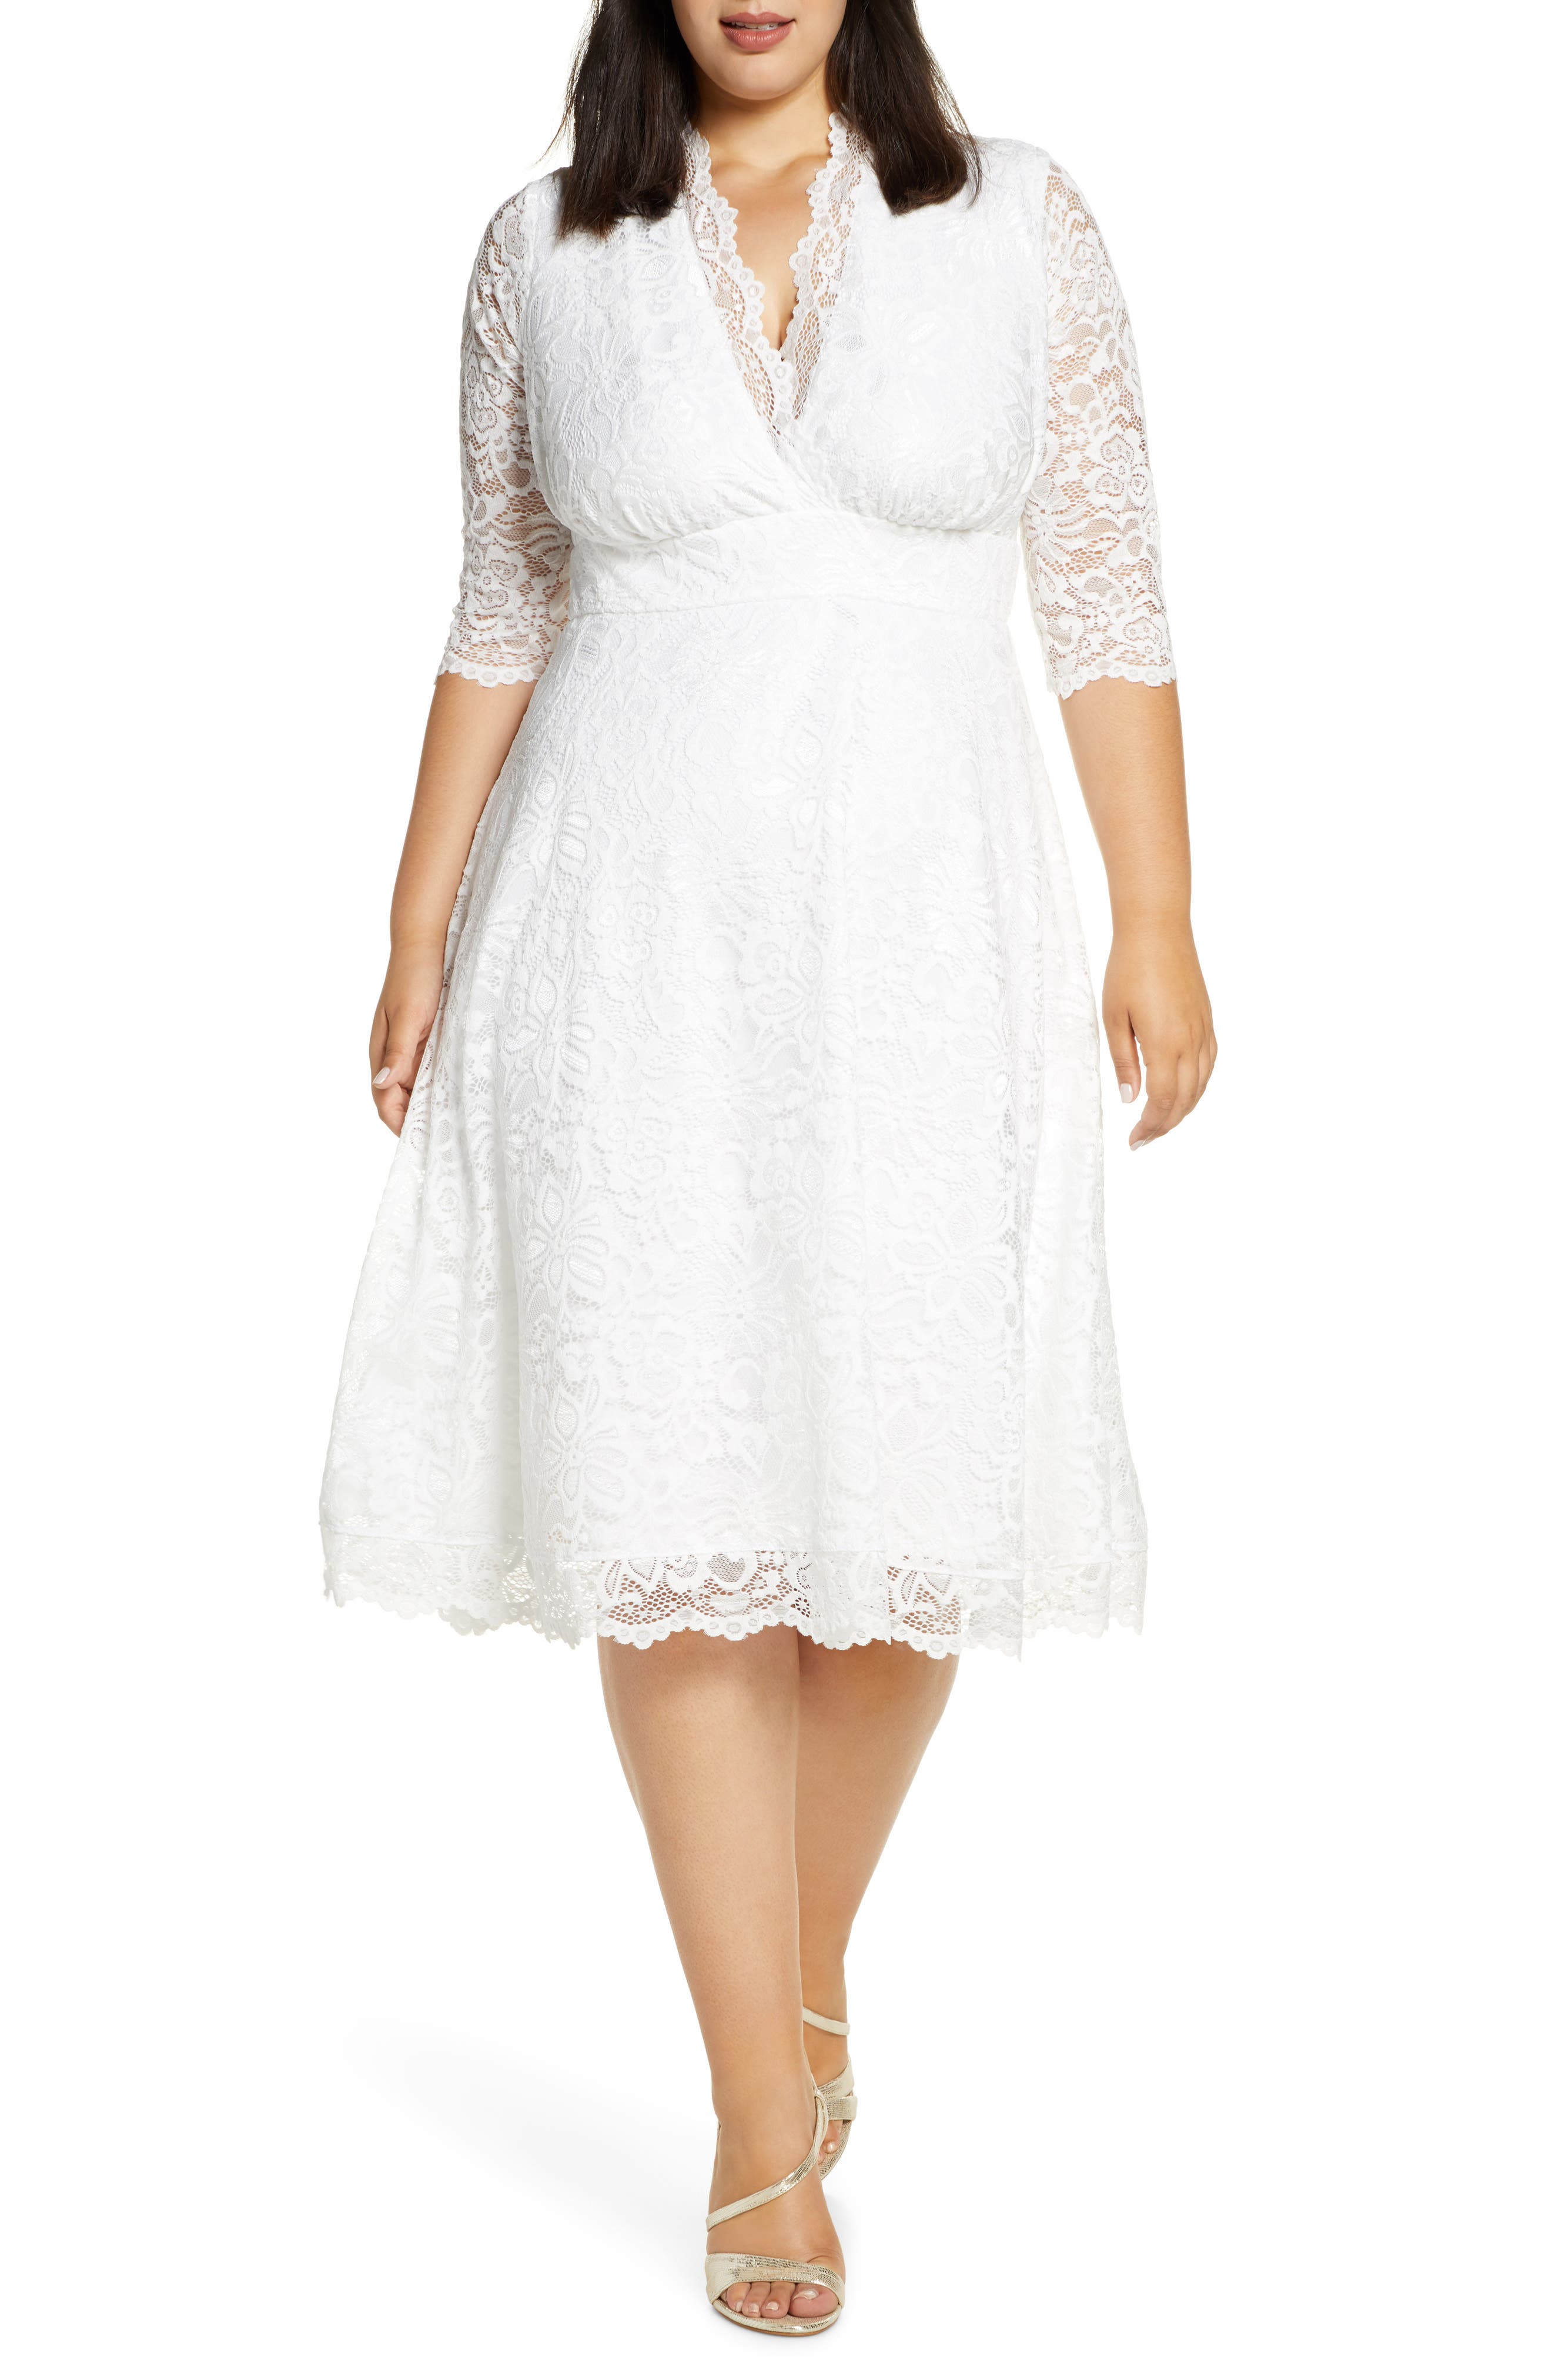 EZON-CH Womens White Floral Lace Sleeved Fit and Flare Curvy Dress M 